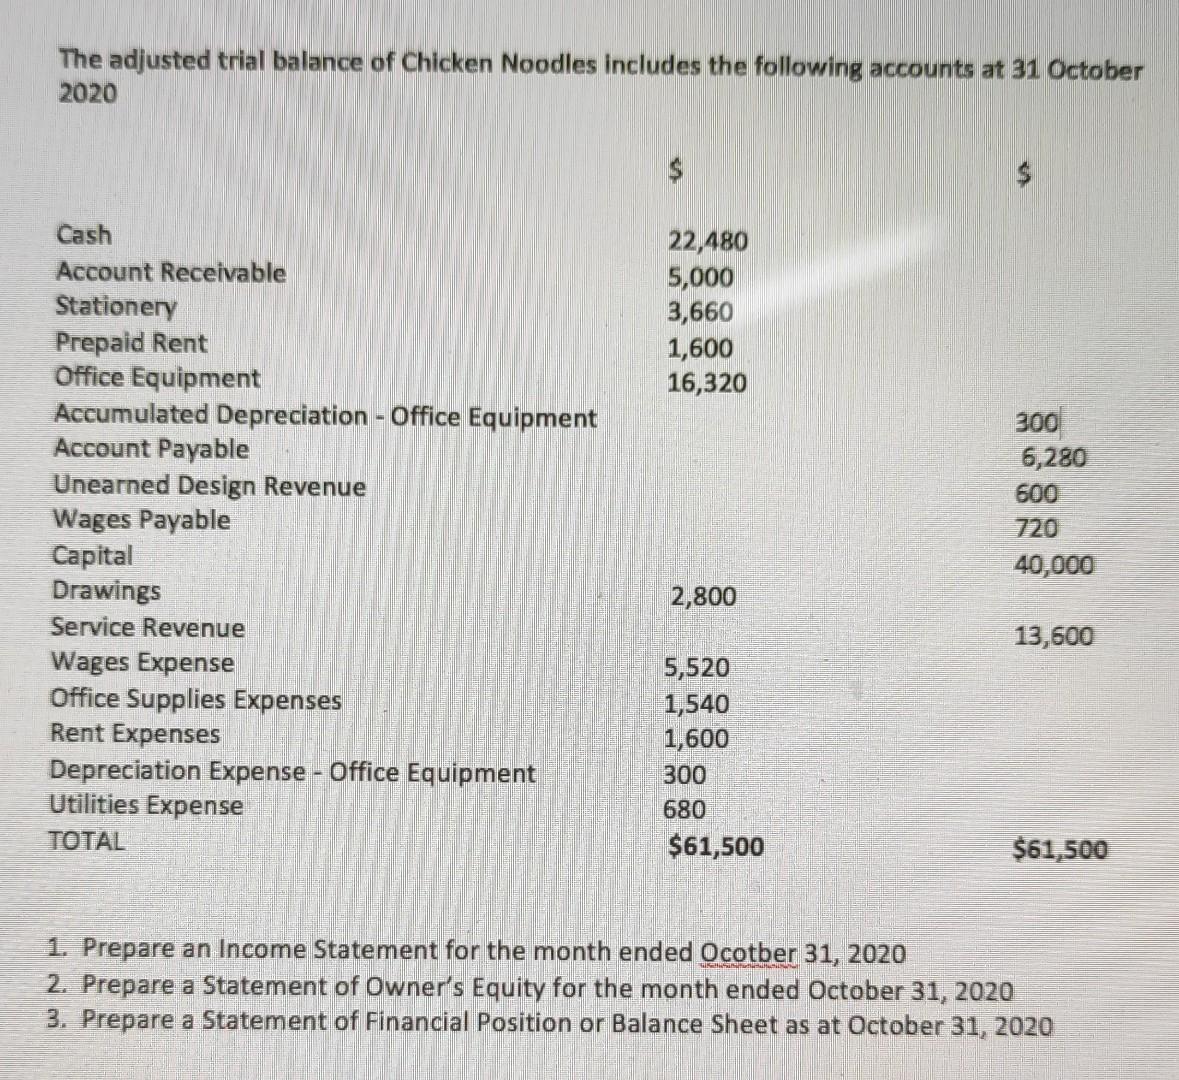 The adjusted trial balance of Chicken Noodles includes the following accounts at 31 October 2020 Cash Account